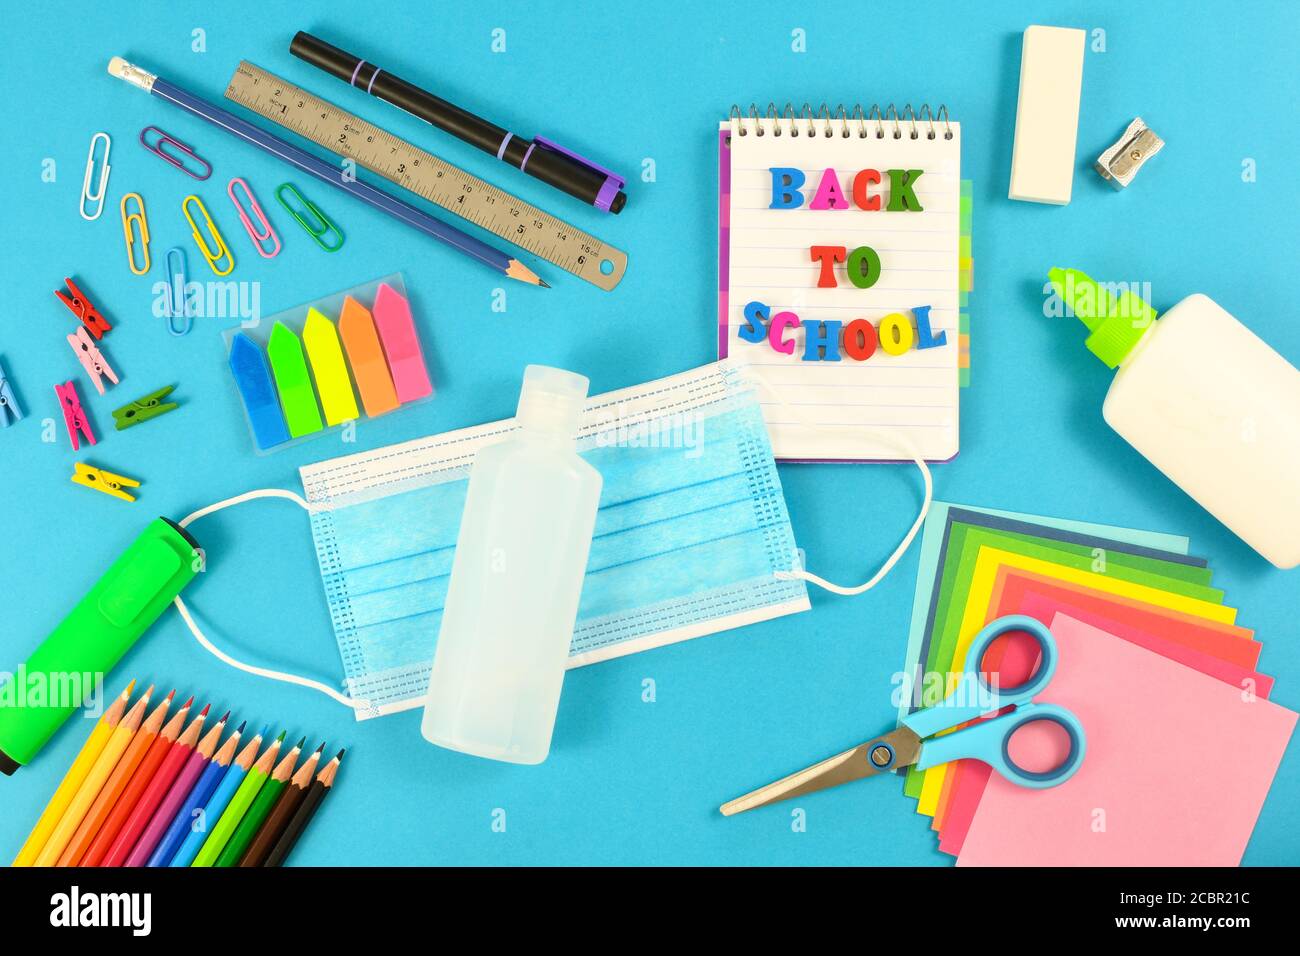 Flat lay shot of school items on a blue surface. Back to school after the pandemic Stock Photo